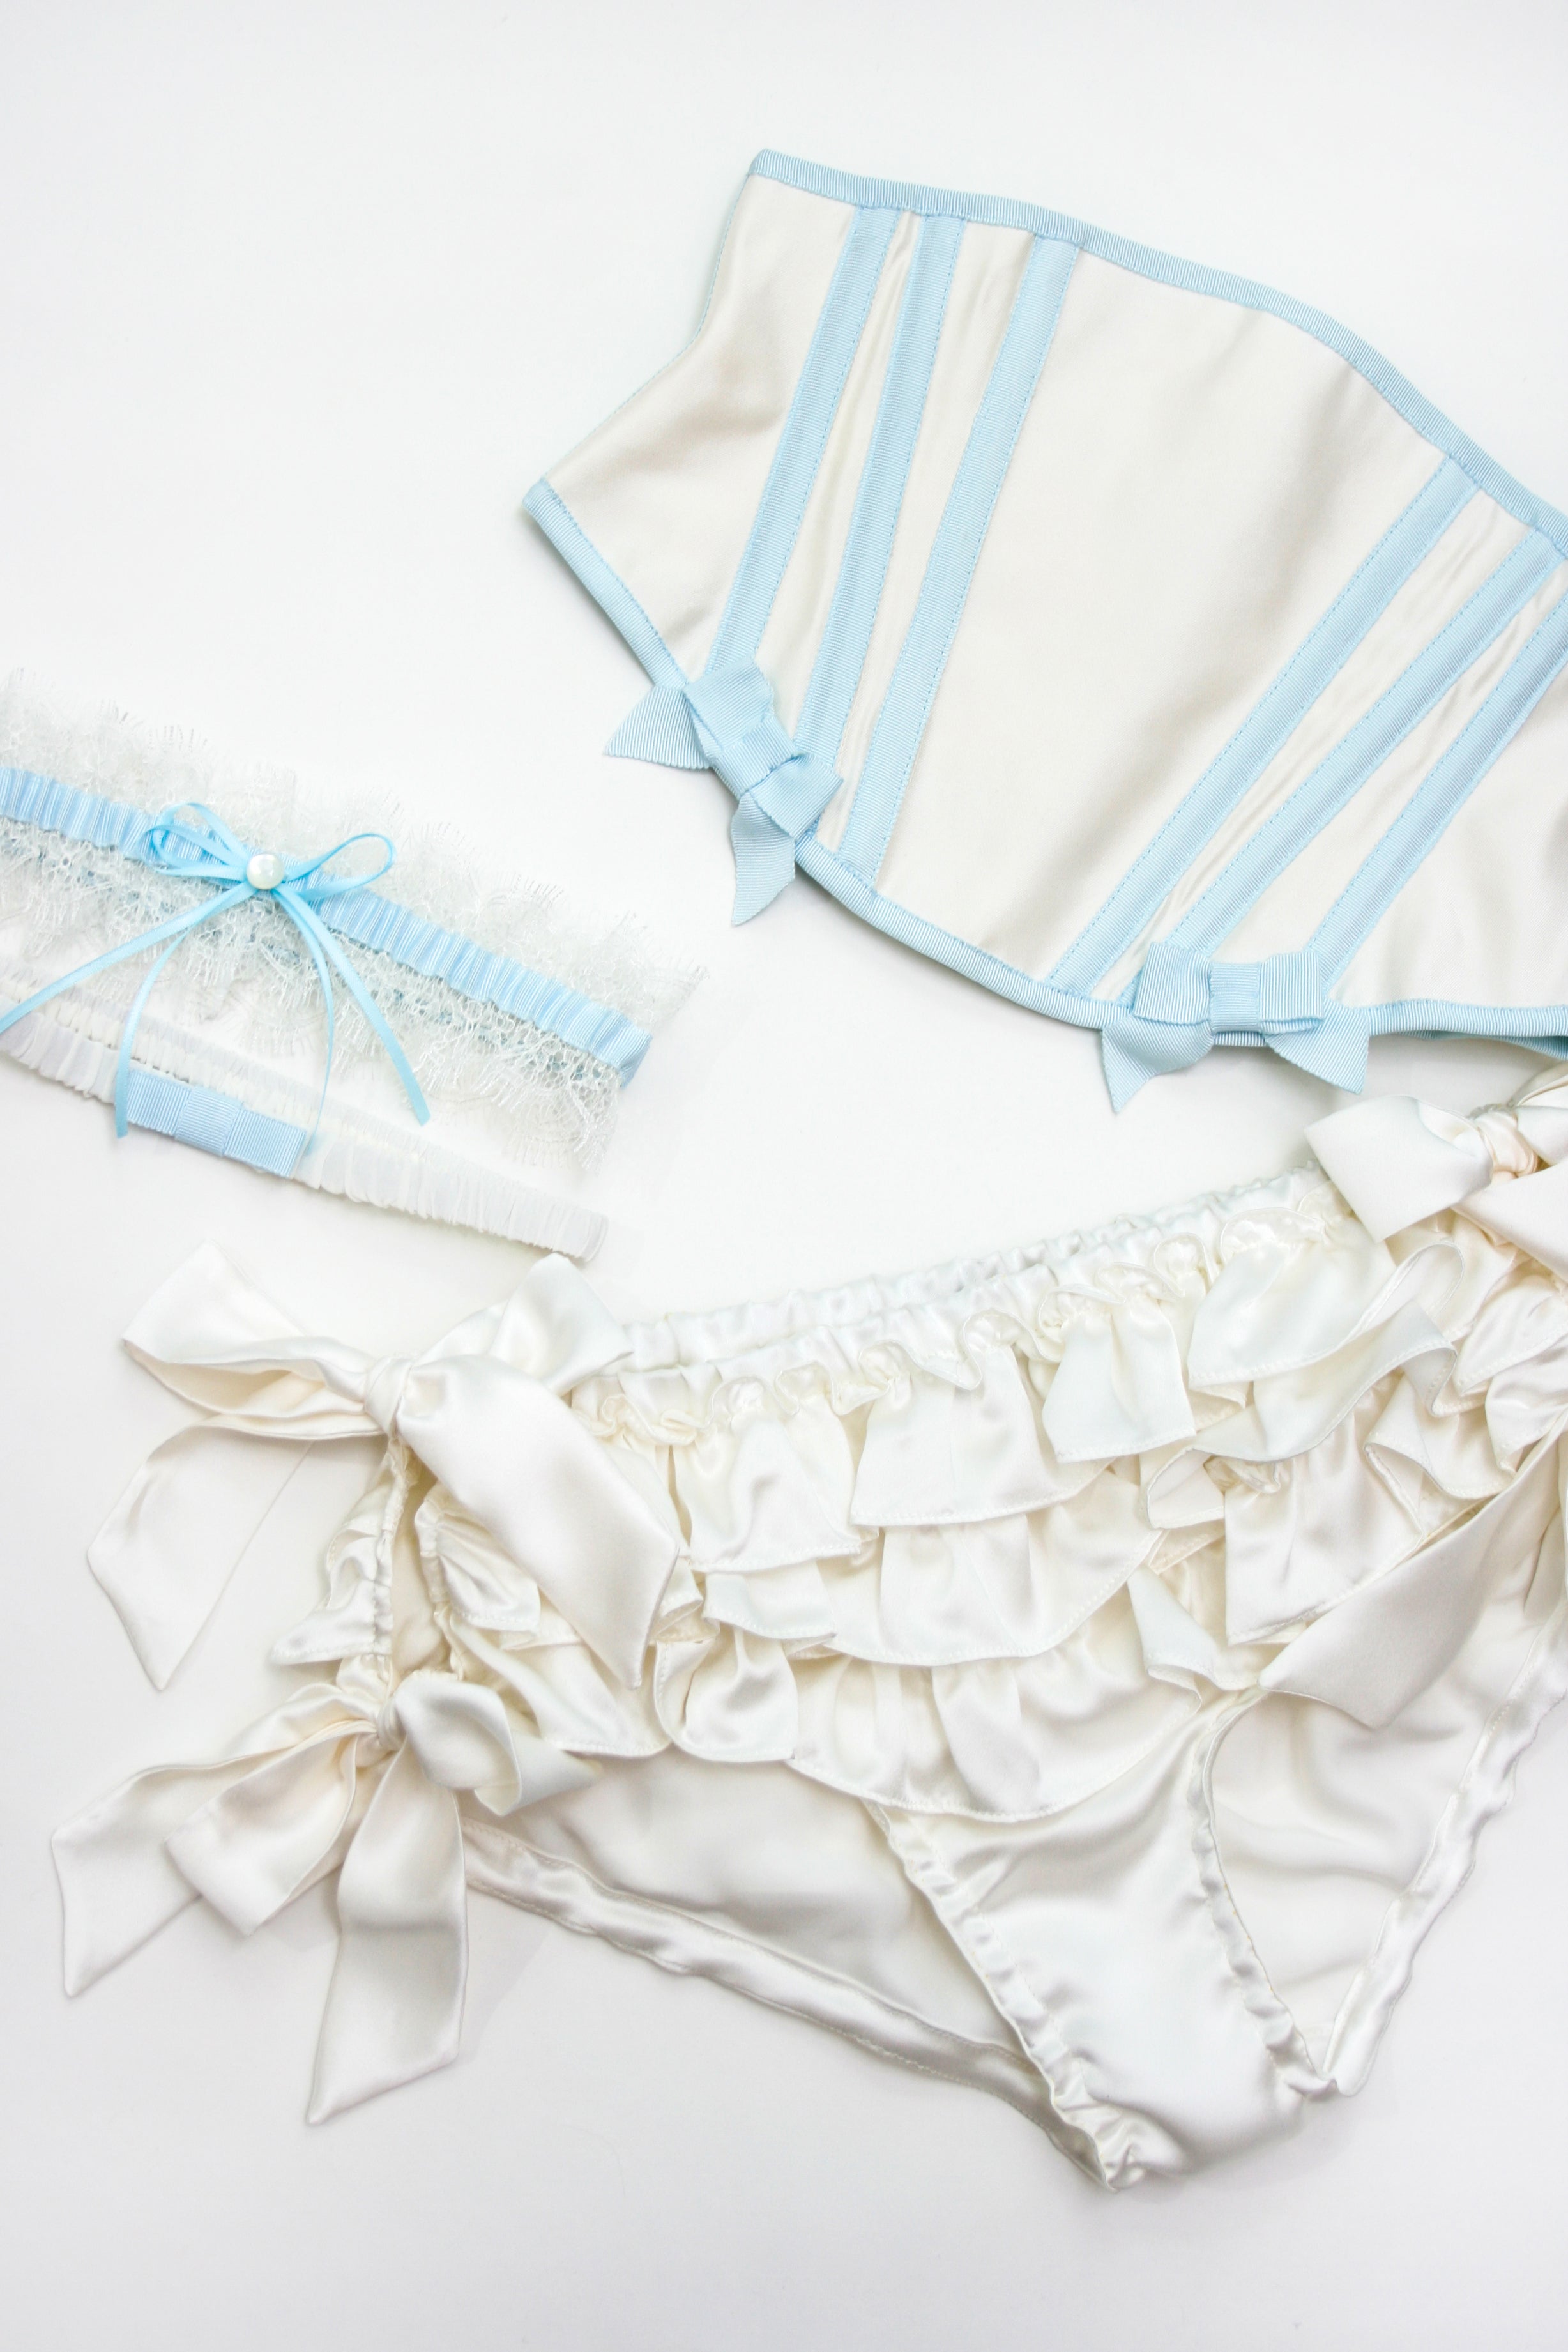 Wedding lingerie set and waspie corset to cinch your waist for your honeymoon